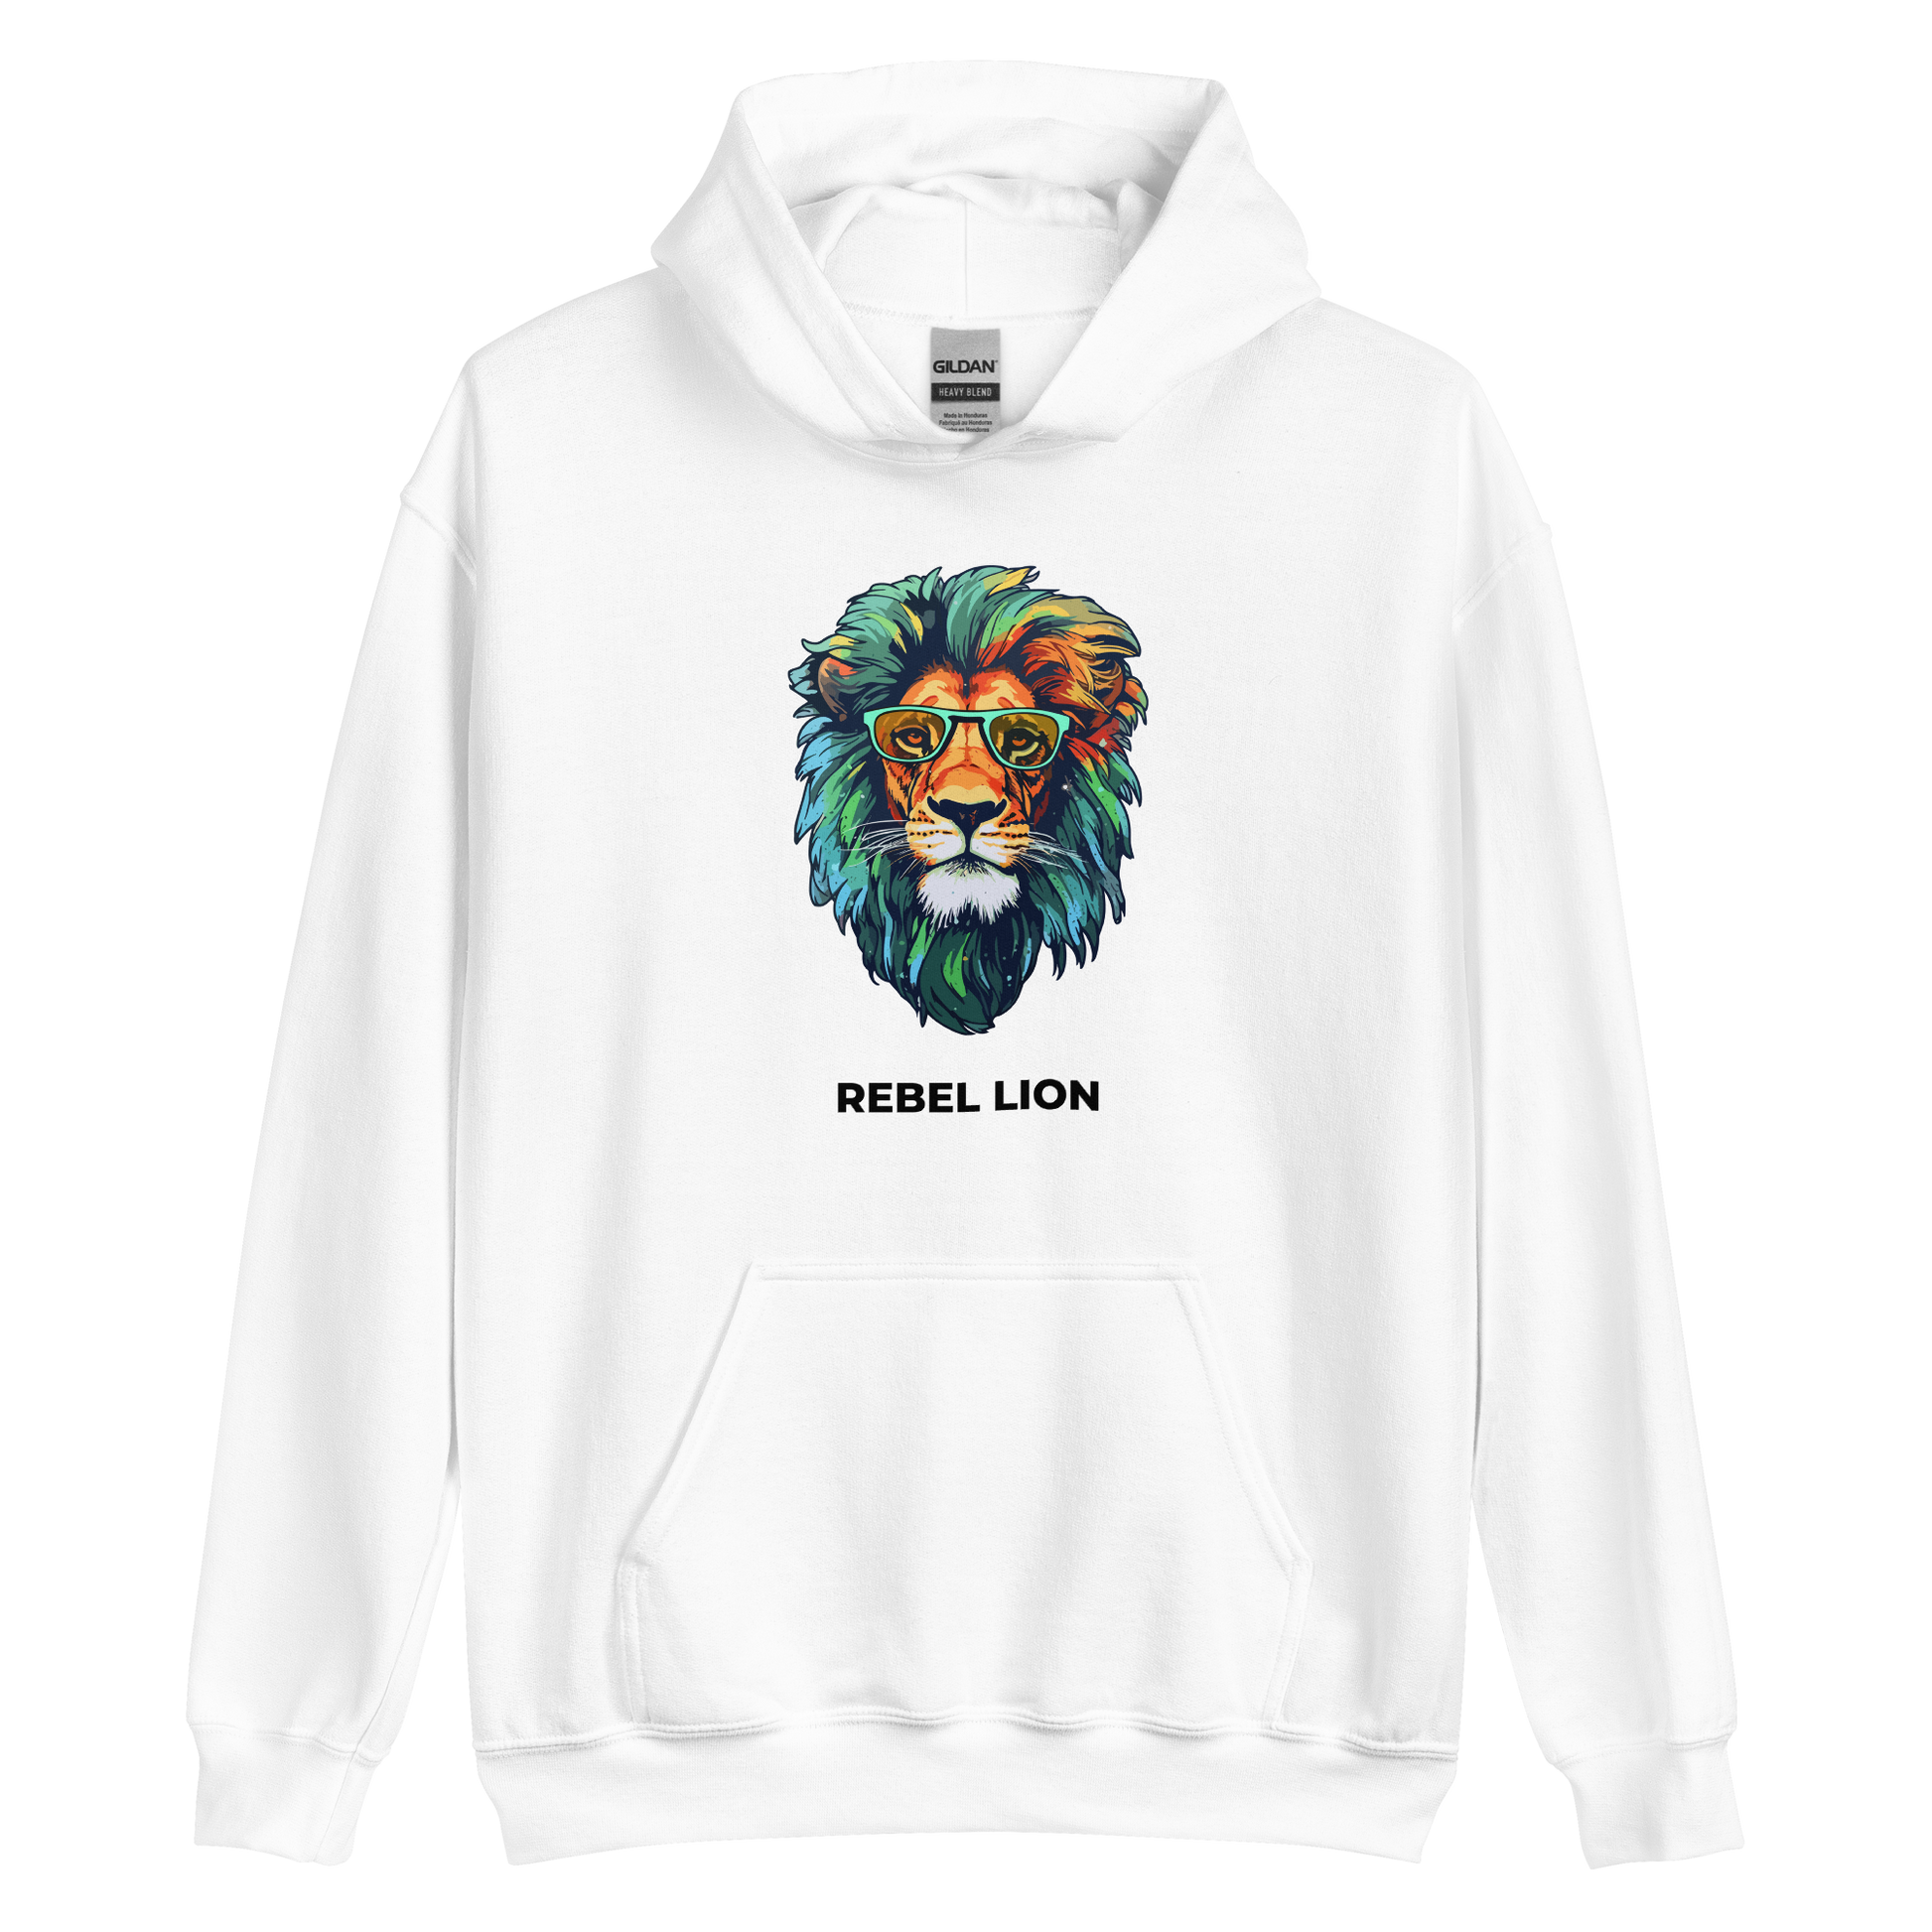 White Lion Hoodie featuring a fierce Rebel Lion graphic on the chest - Funny Graphic Lion Hoodies - Boozy Fox